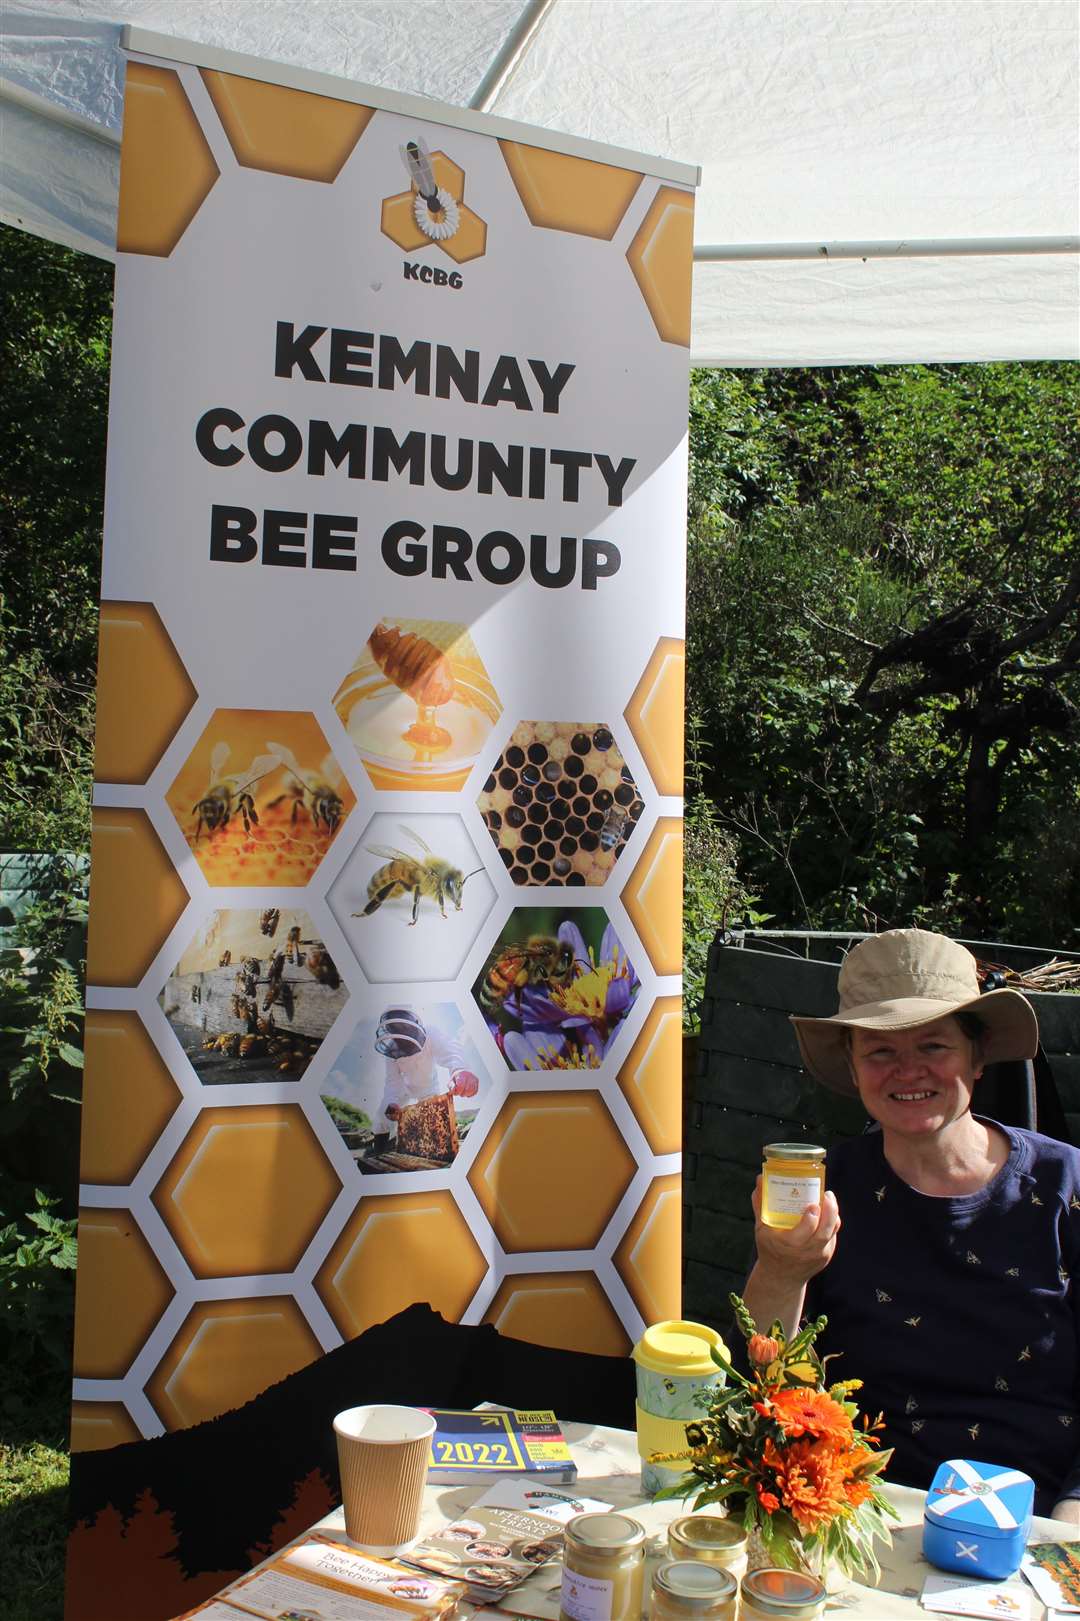 Chair of Kemnay community bee group Sonya MacPherson was happy to tell customers all about the fascinating subject of bee keeping which can bring the countryside to life at Birley Bush open day in KemnayPicture: Griselda McGregor